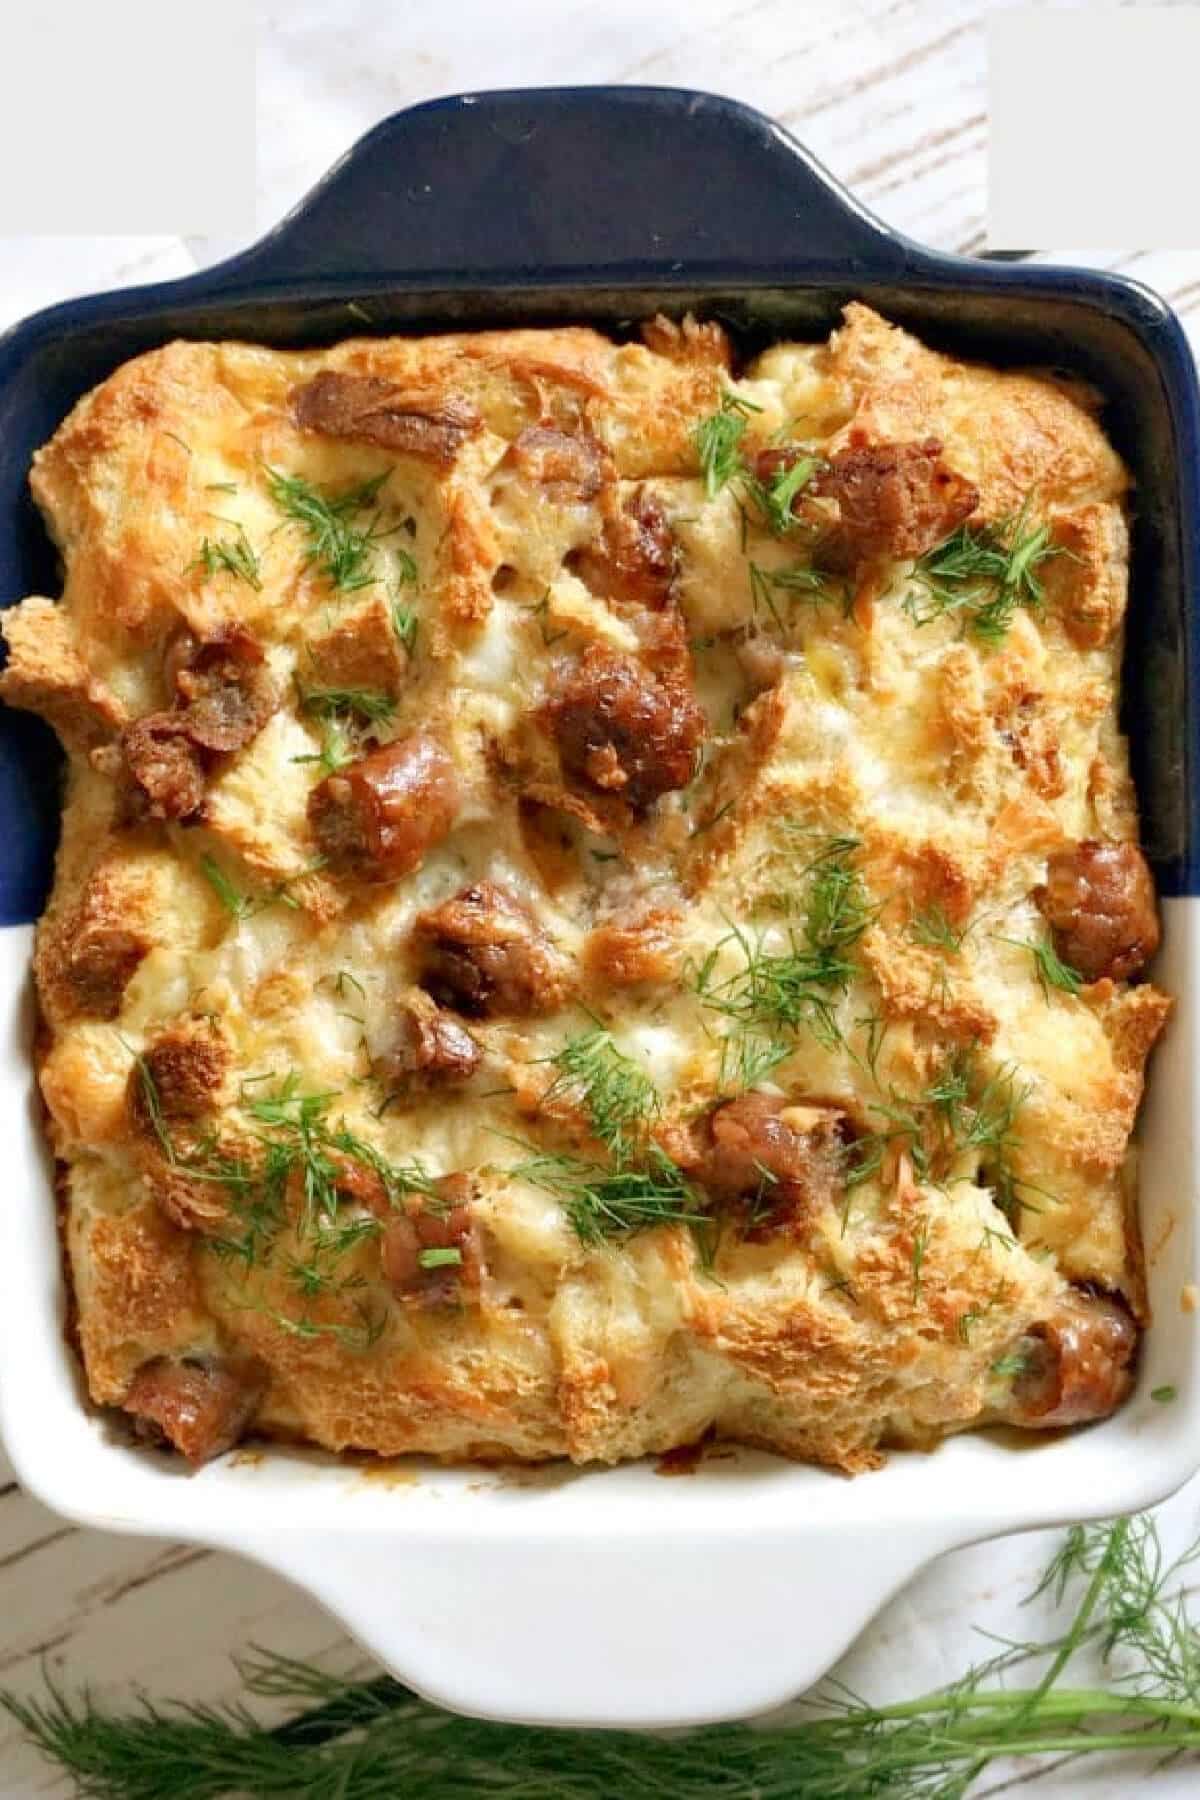 A dish with egg casserole